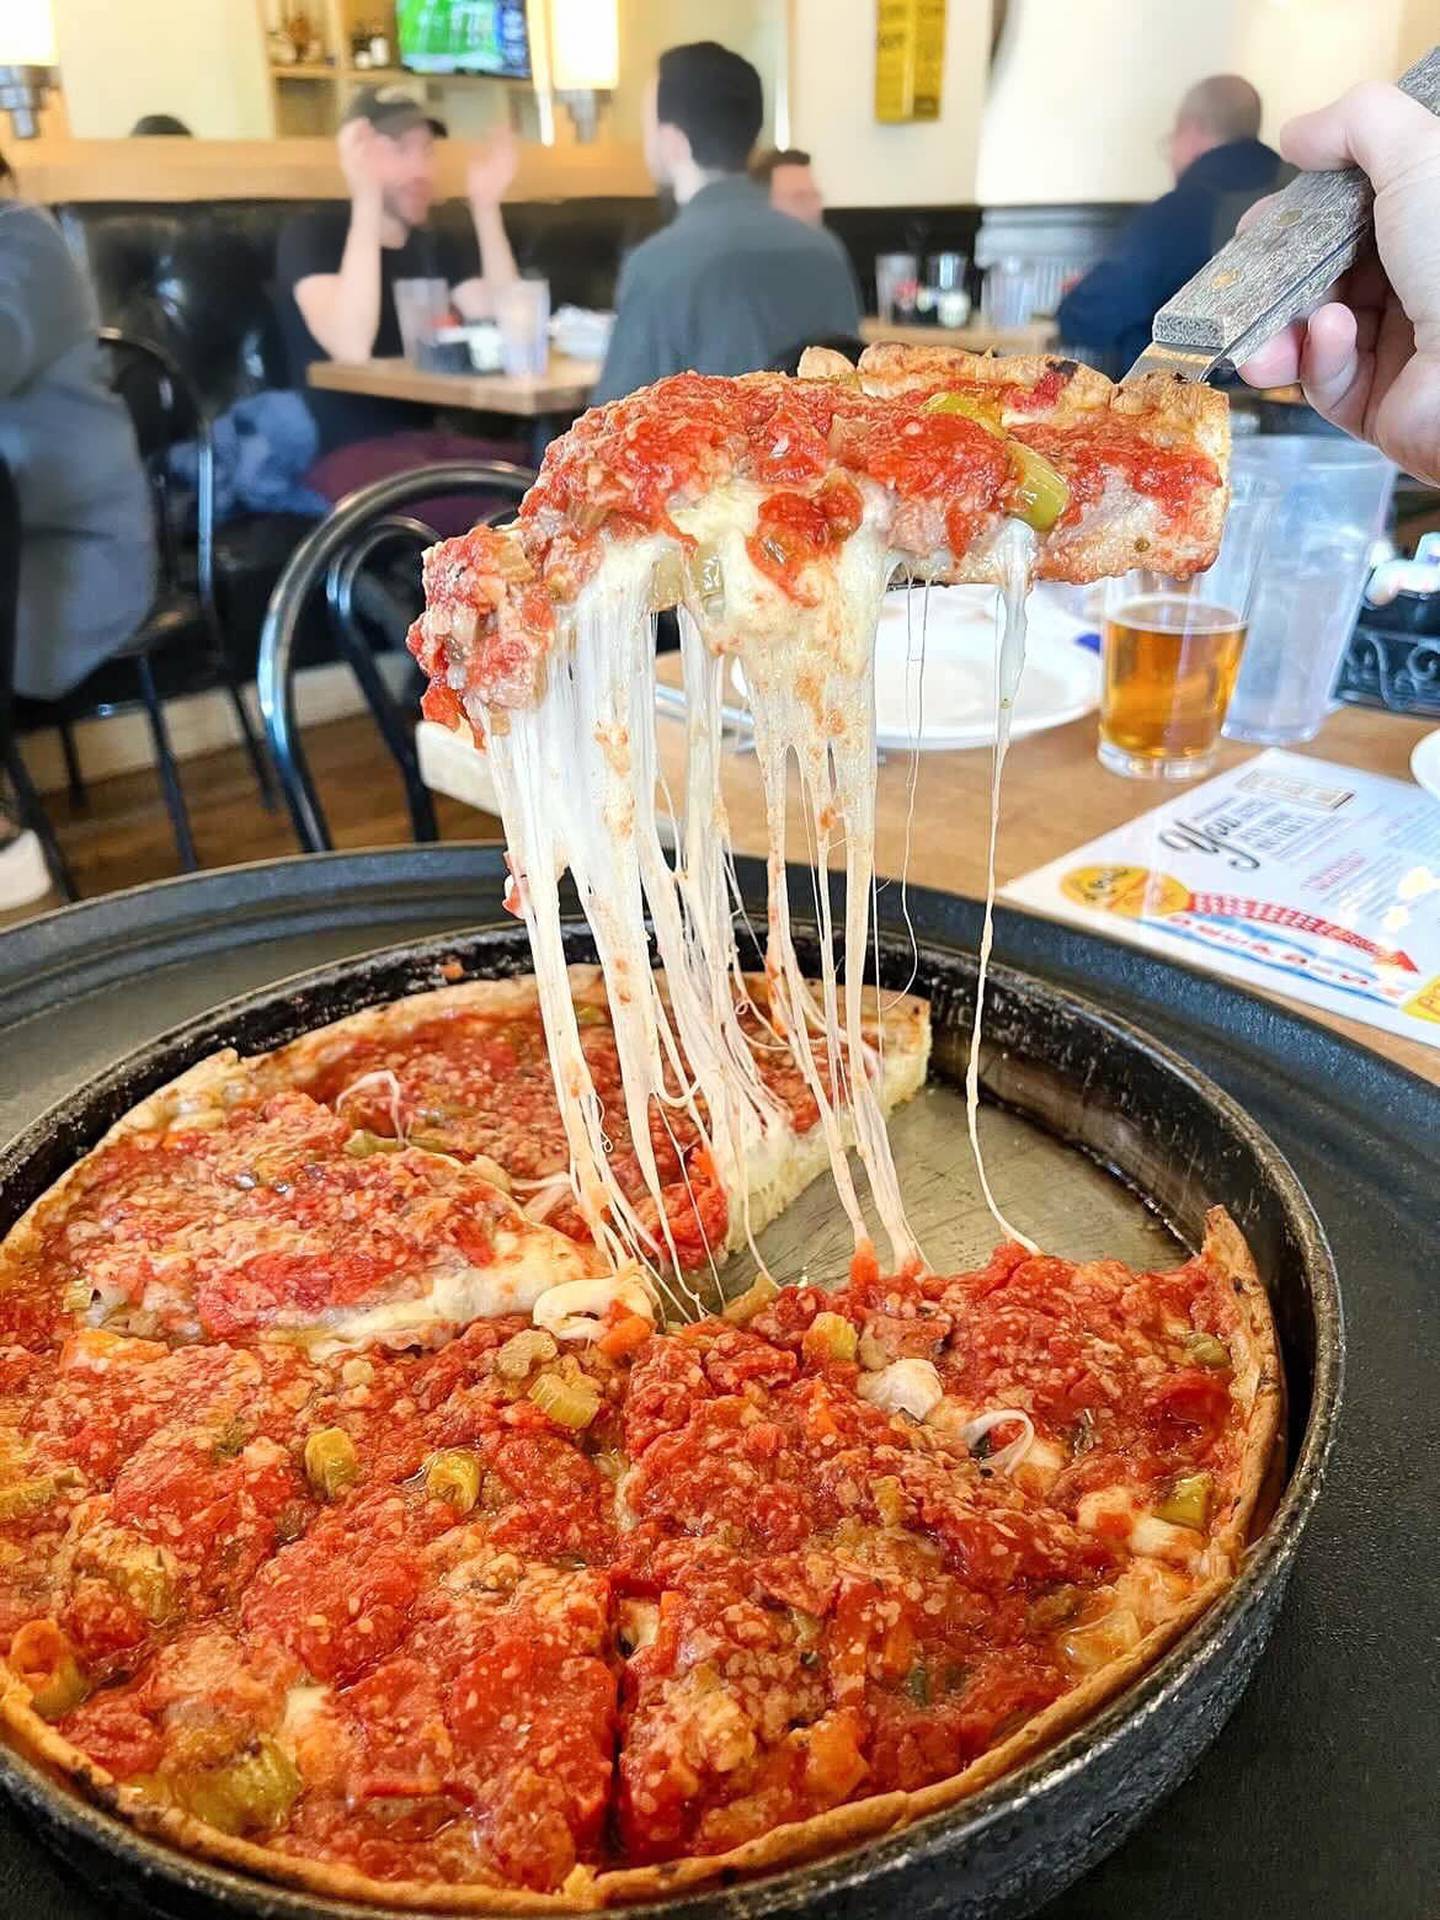 Lou Malnati's Pizza was voted as one of the best pizza places in McHenry County. (Photo from Lou Malnati's Facebook page)